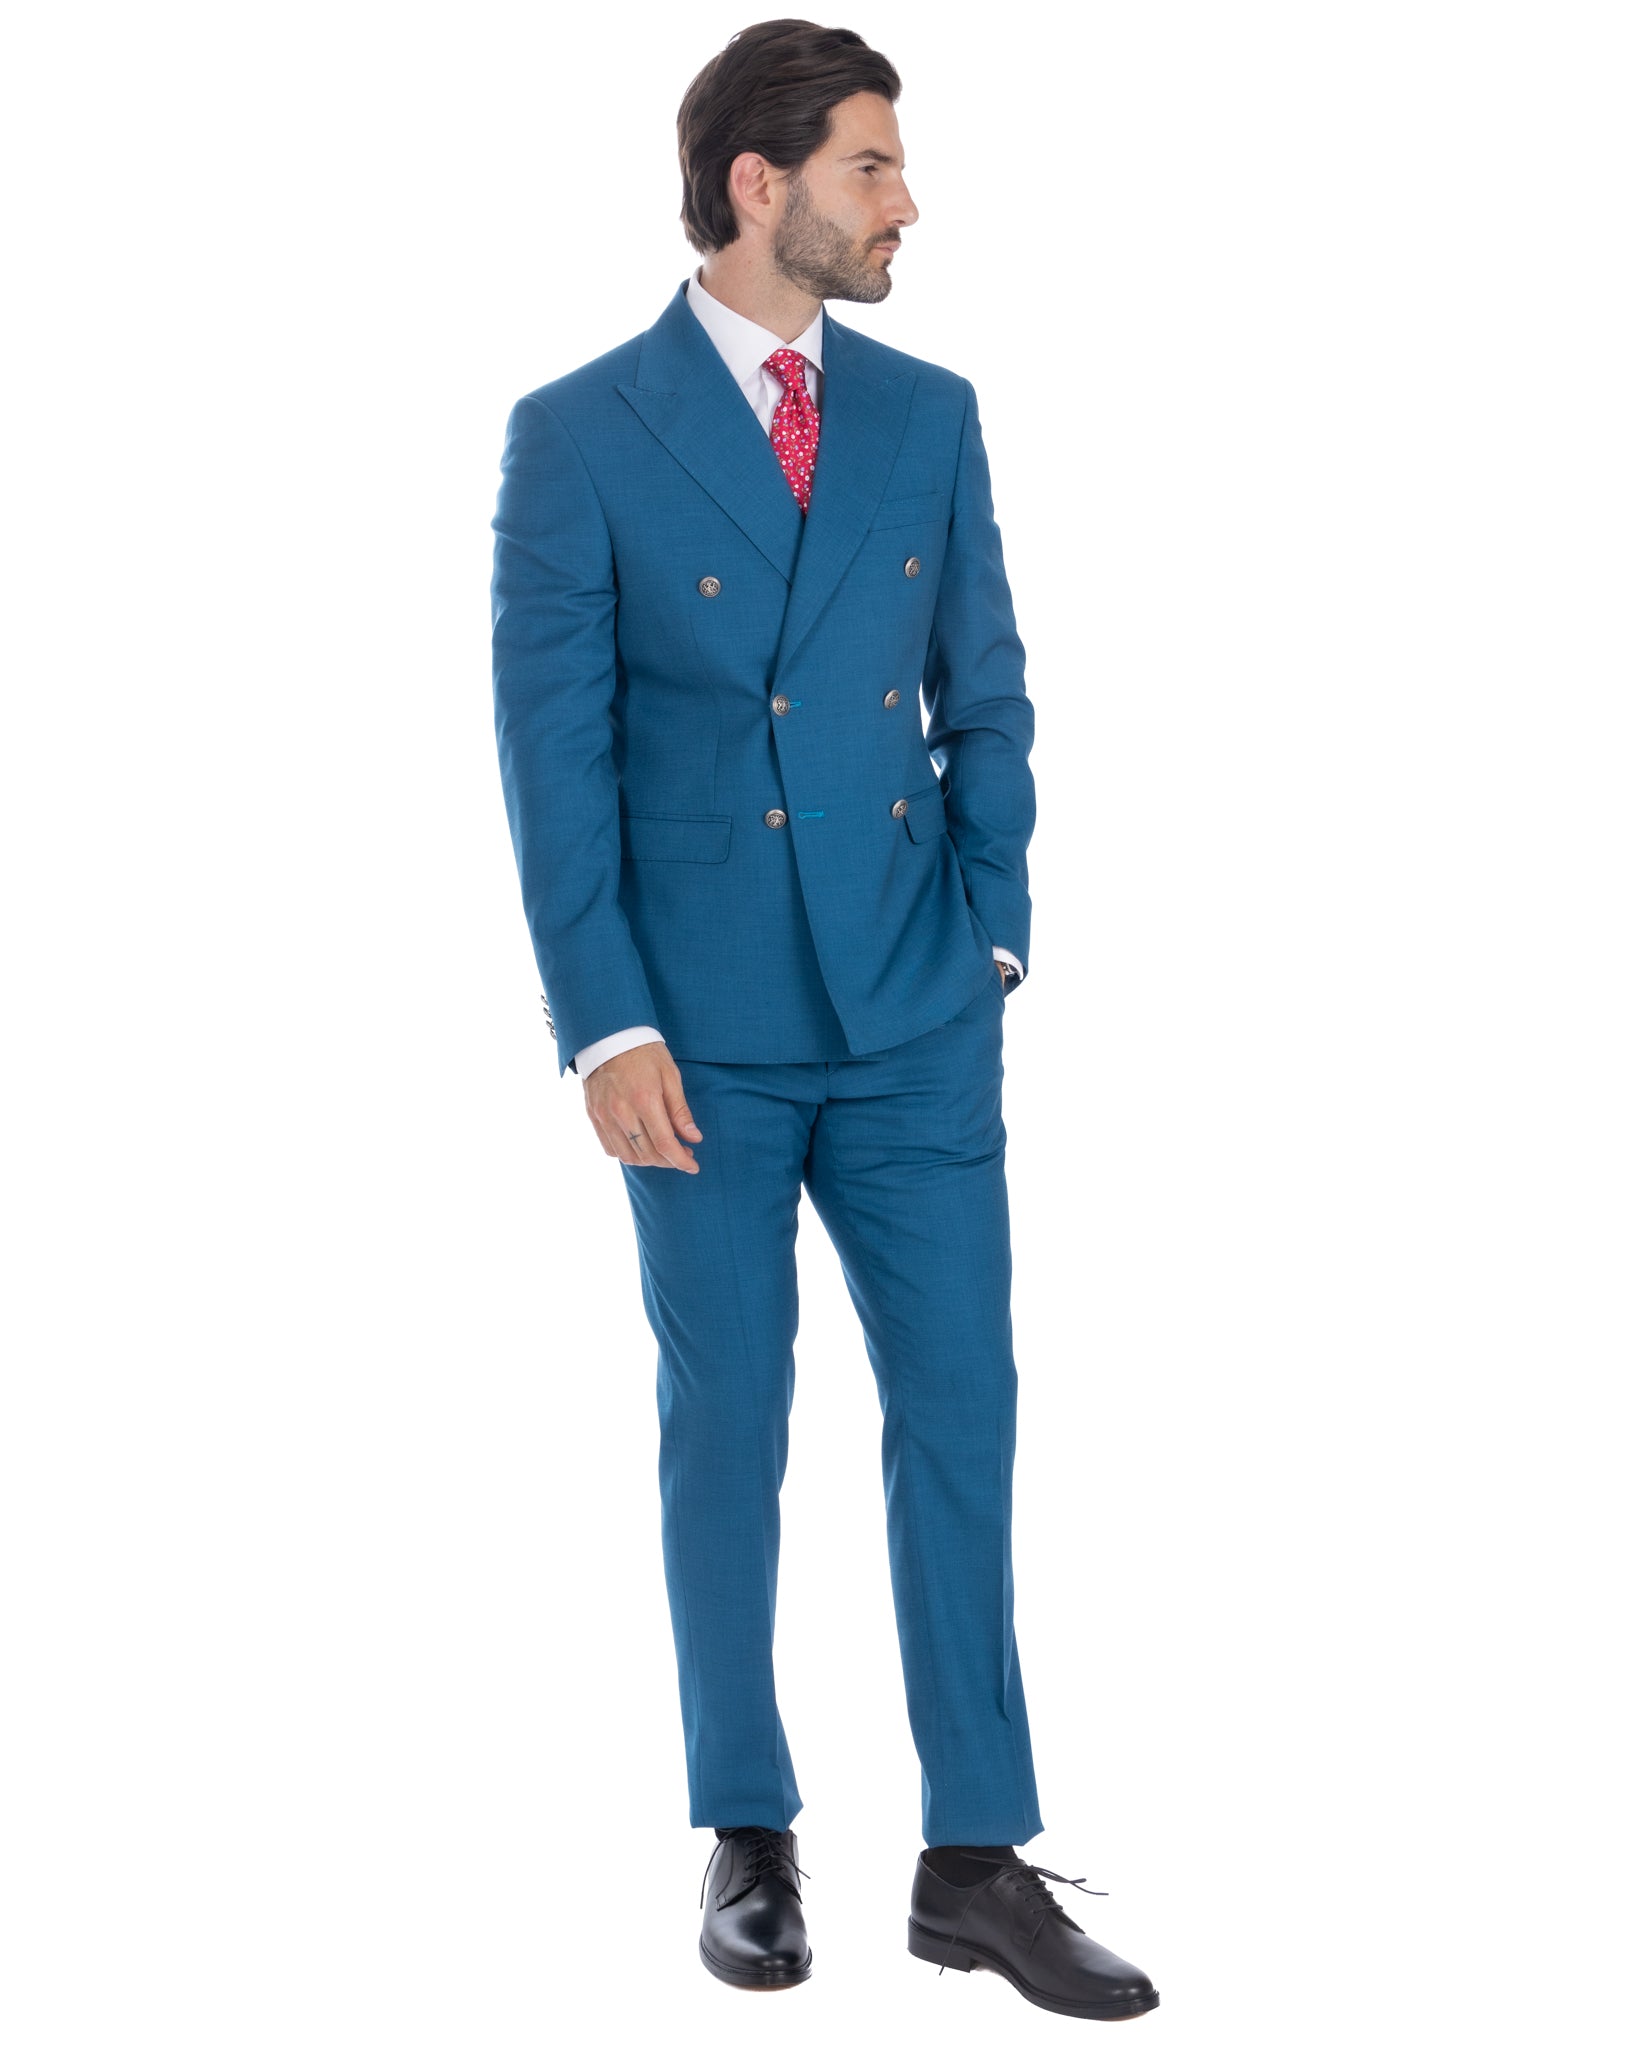 Thun - teal melange double-breasted suit